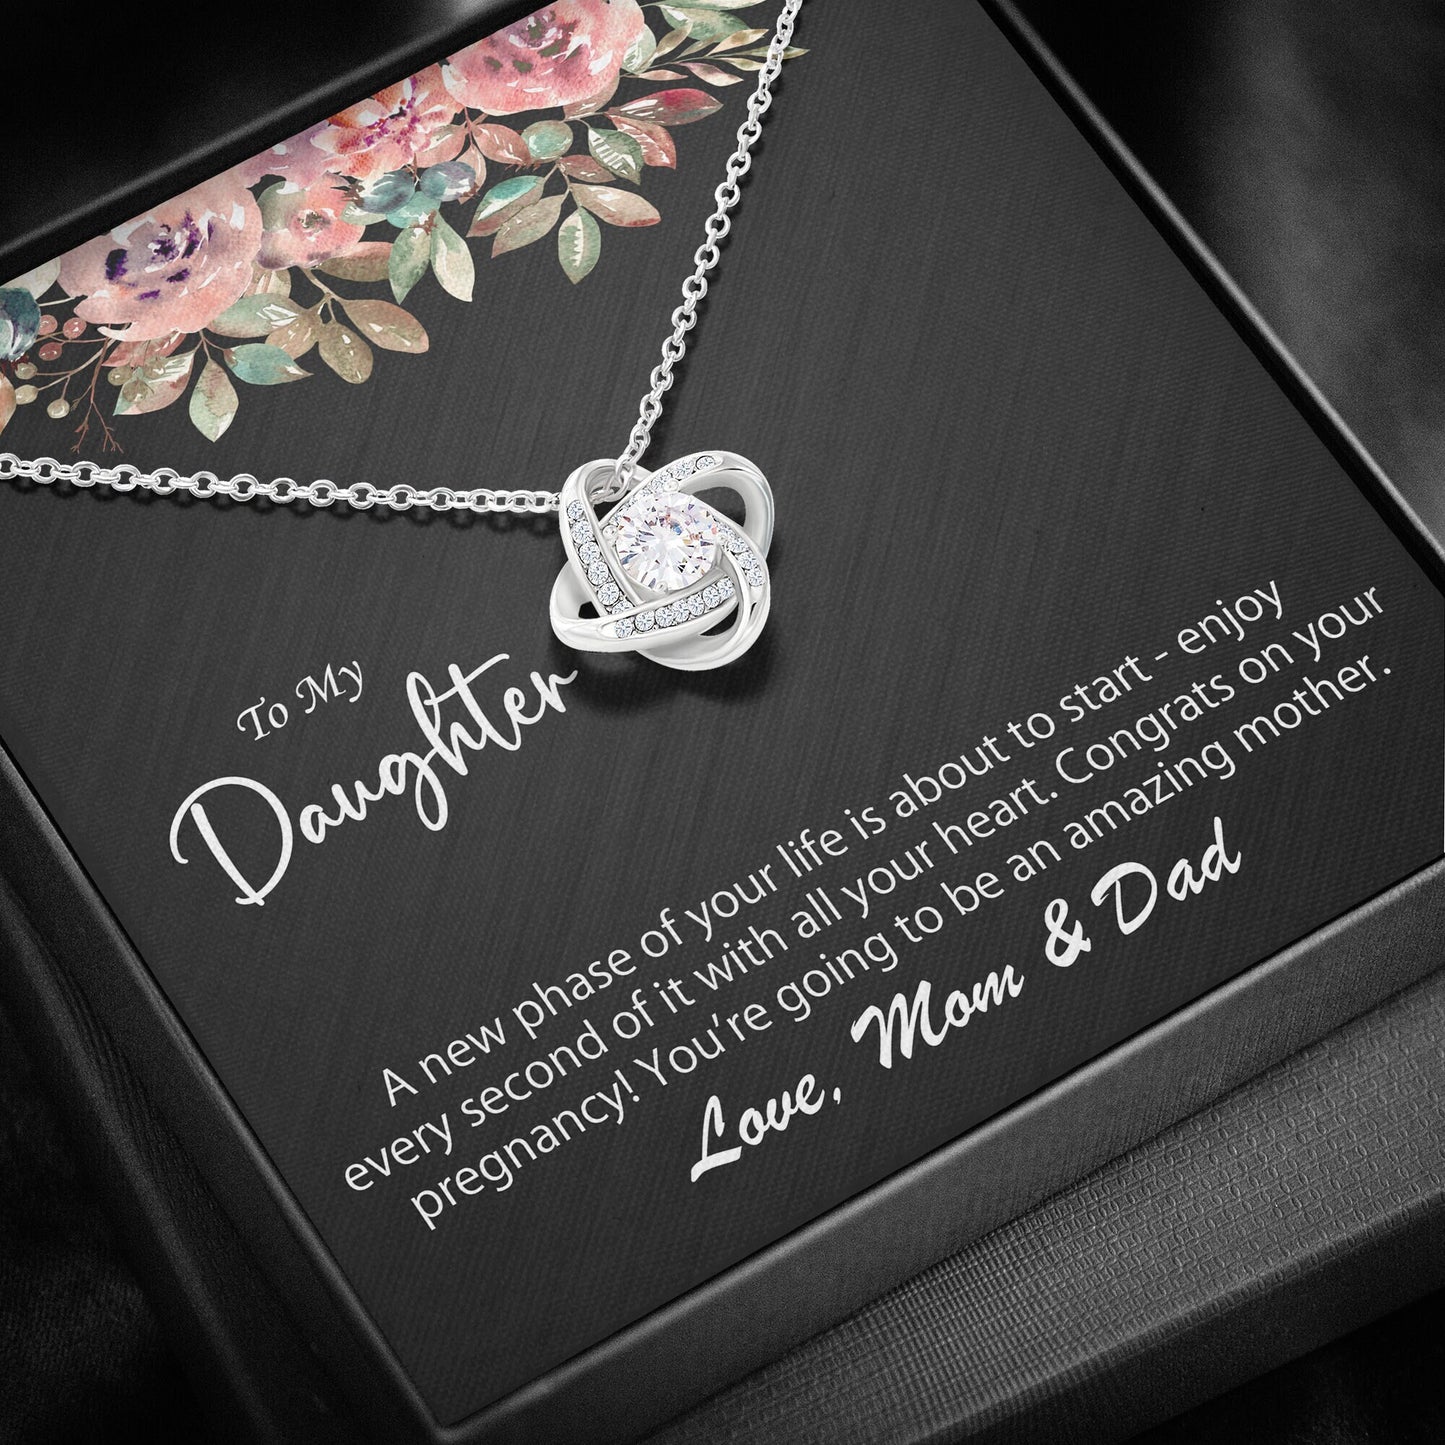 To My Daughter Pregnancy Necklace Gift For Her, 14K White Gold, 18K Yellow Gold Gift For Daughter, Jewelry Custom Gift Card From Mom & Dad